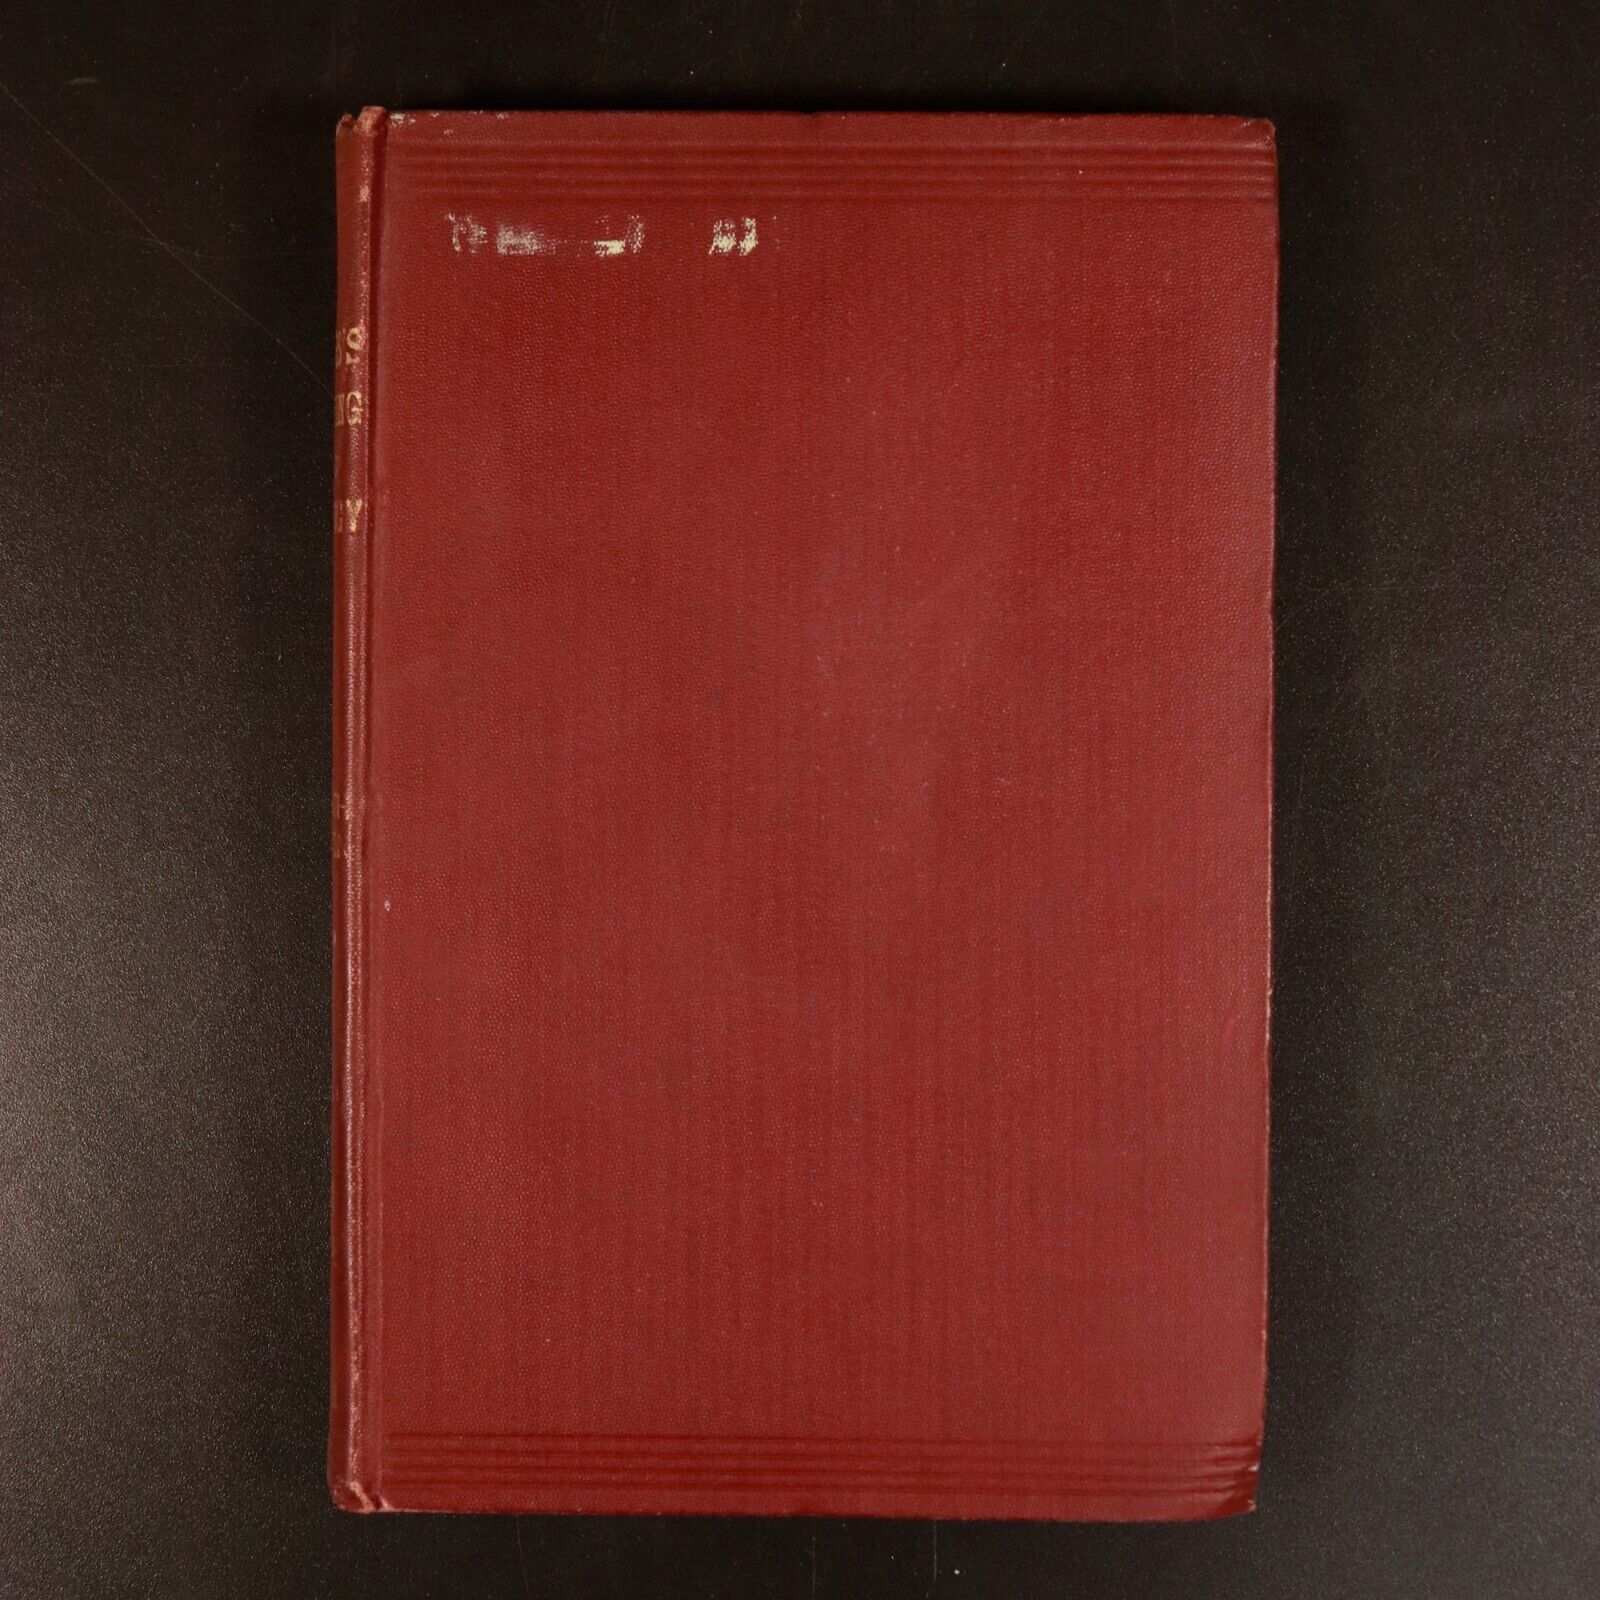 1918 Banking & Currency by Ernest Sykes - Antique Financial Reference Book